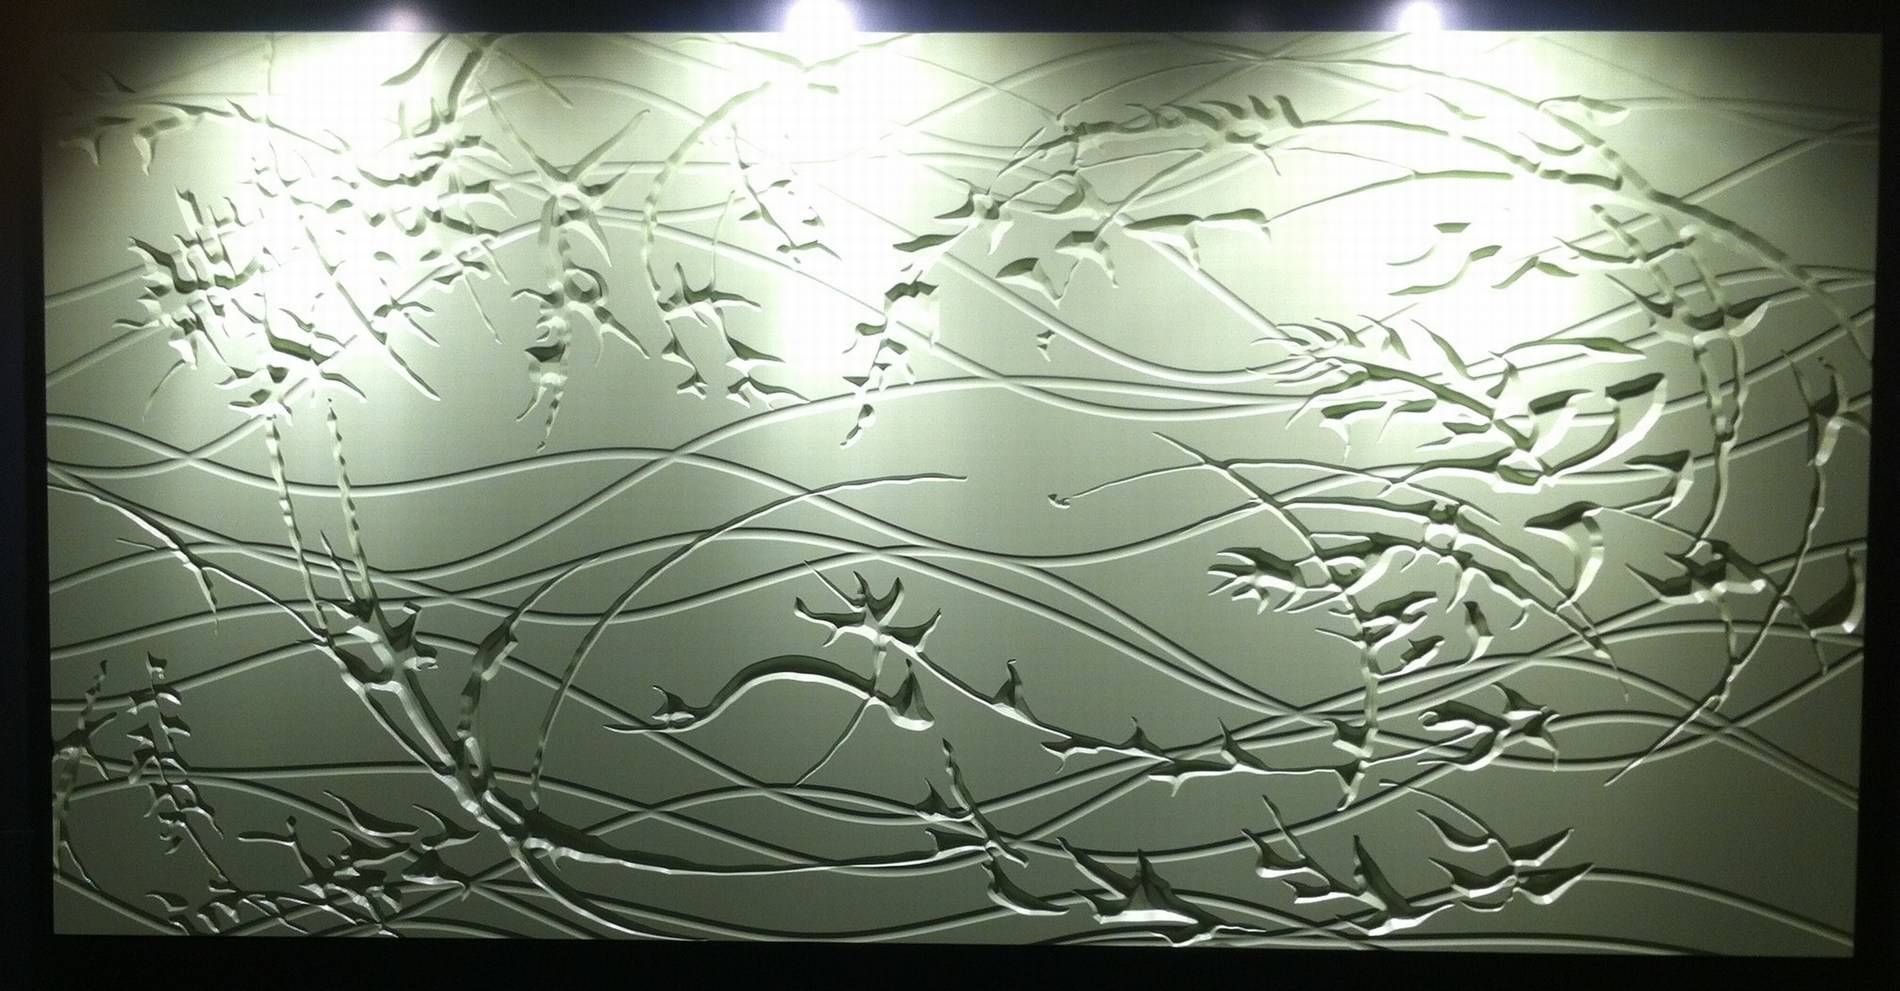 Mini Asian Wind Wall 3d Wall Panel Design Featuring Chip Carving Intended For 2017 Vancouver 3d Wall Art (View 18 of 20)